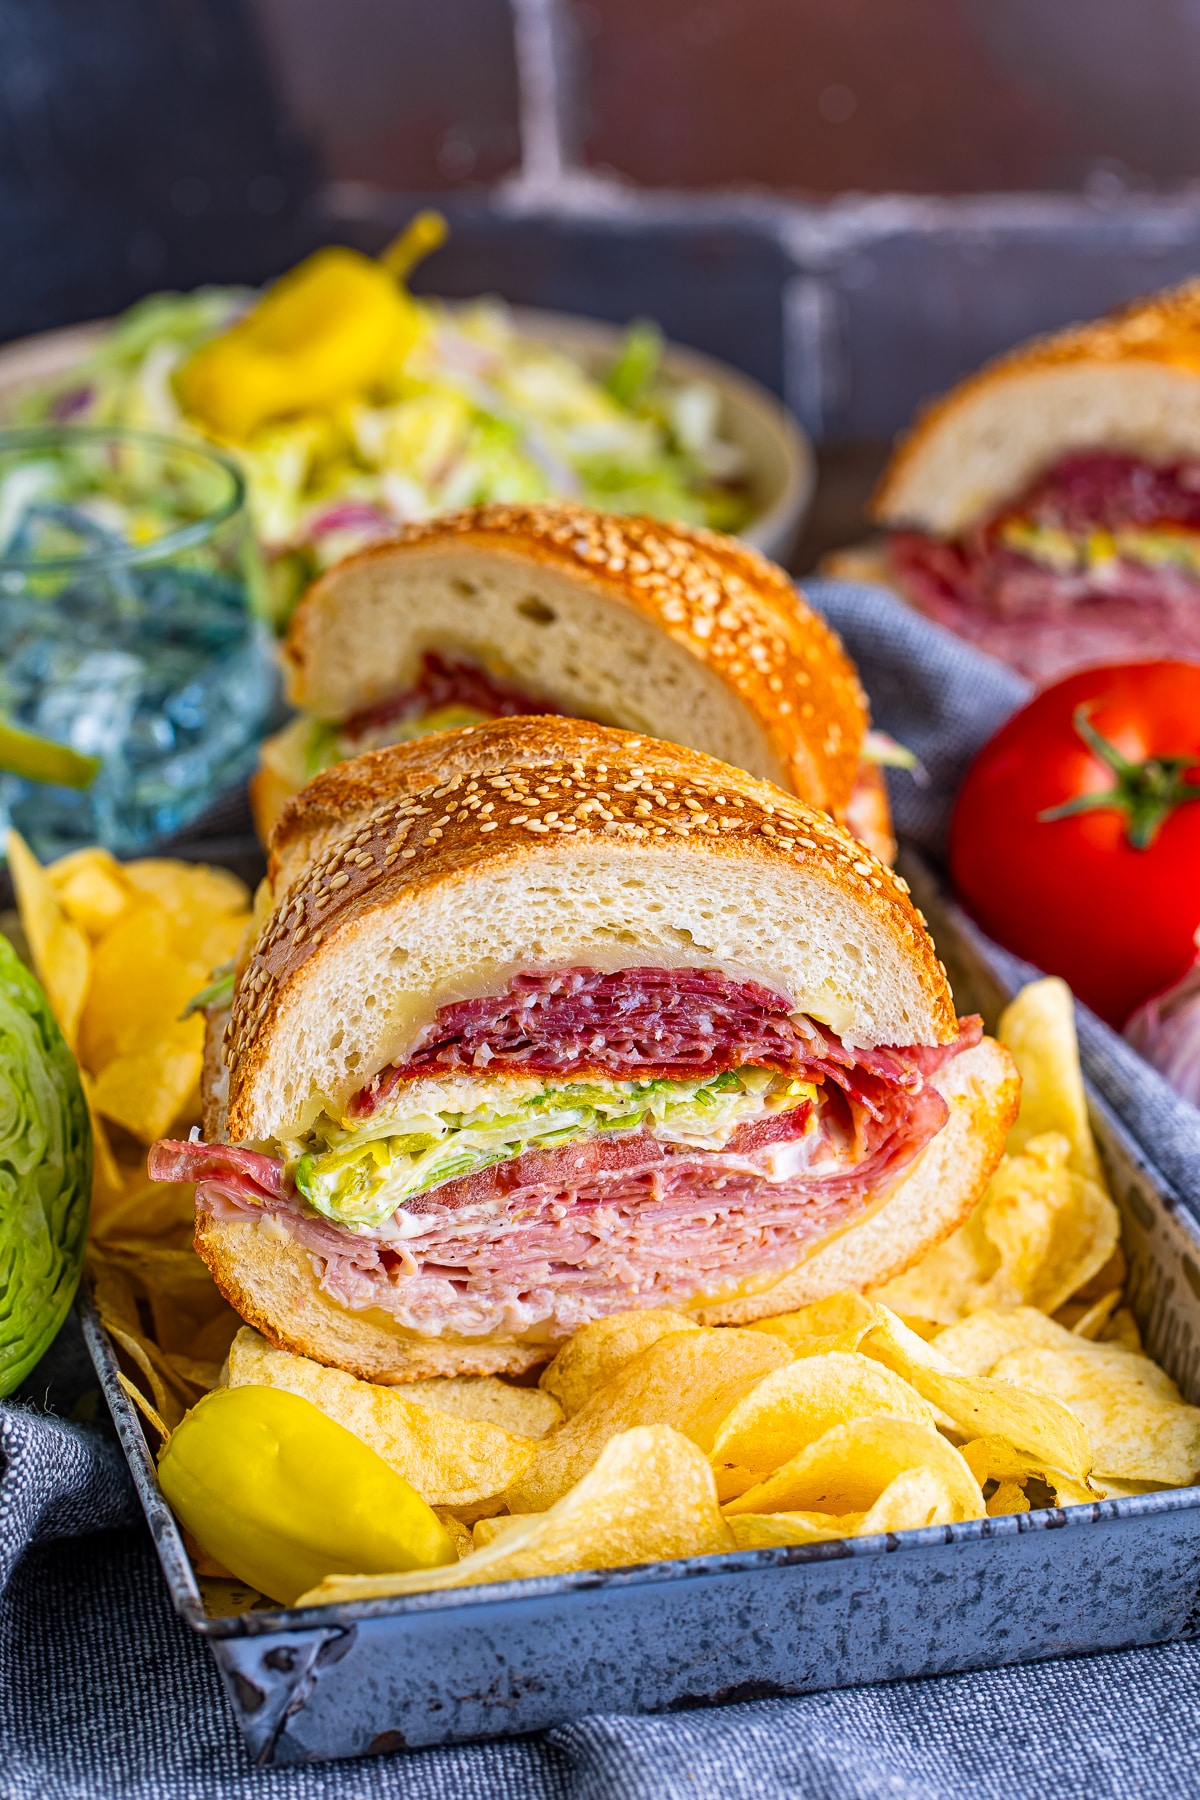 grinder sandwich recipe on a bed of chips